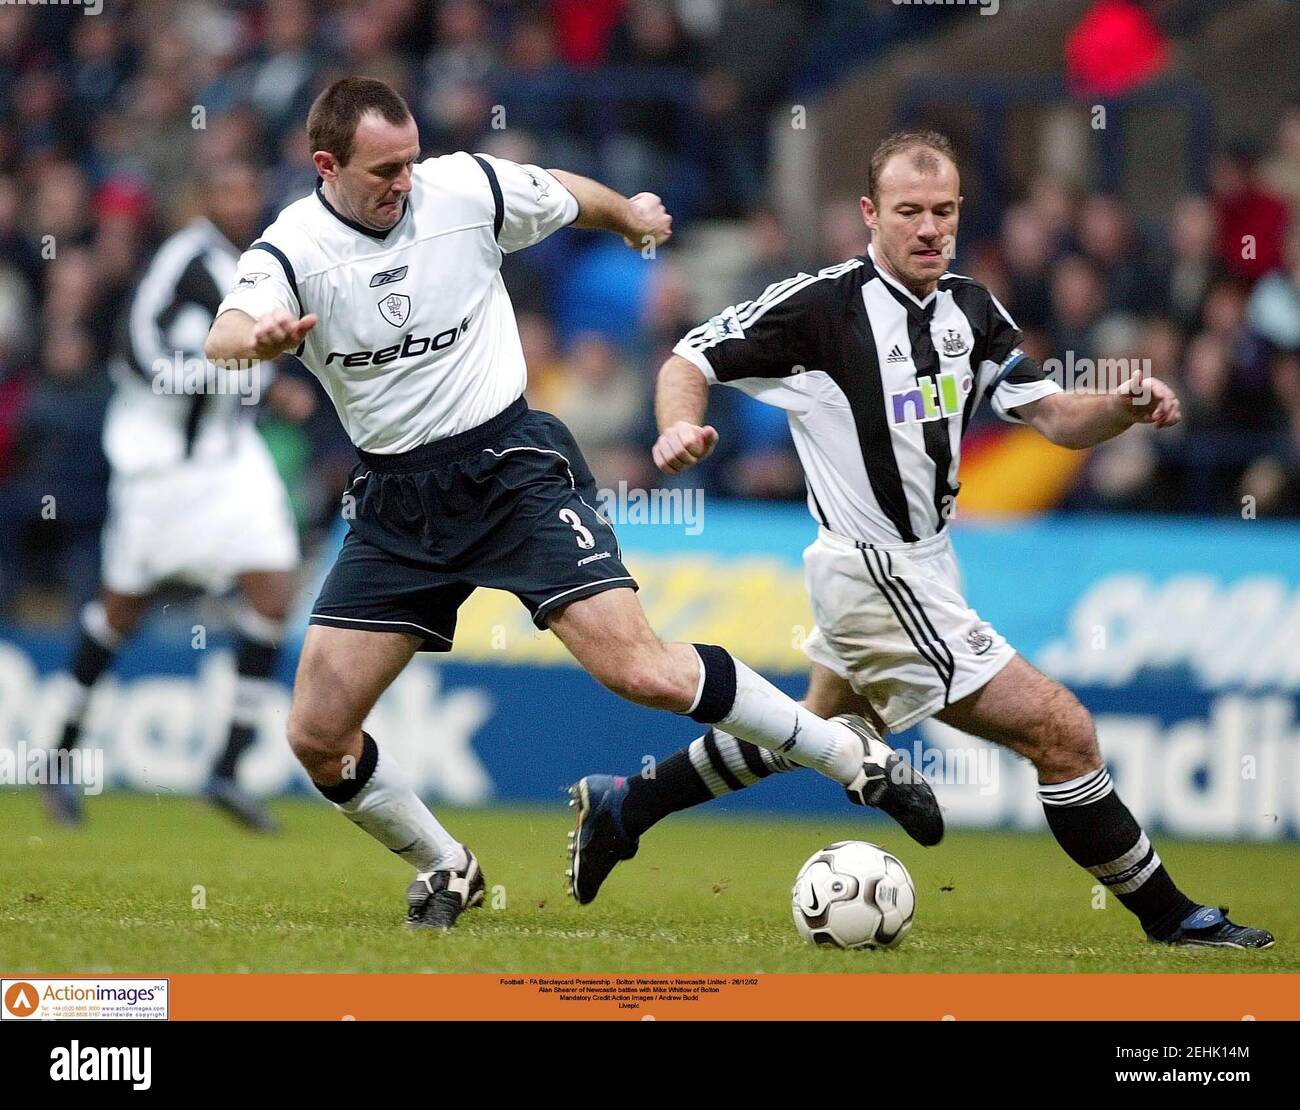 Football - FA Barclaycard Premiership - Bolton Wanderers v Newcastle United - 26/12/02  Alan Shearer of Newcastle battles with Mike Whitlow of Bolton  Mandatory Credit:Action Images / Andrew Budd  Livepic Stock Photo